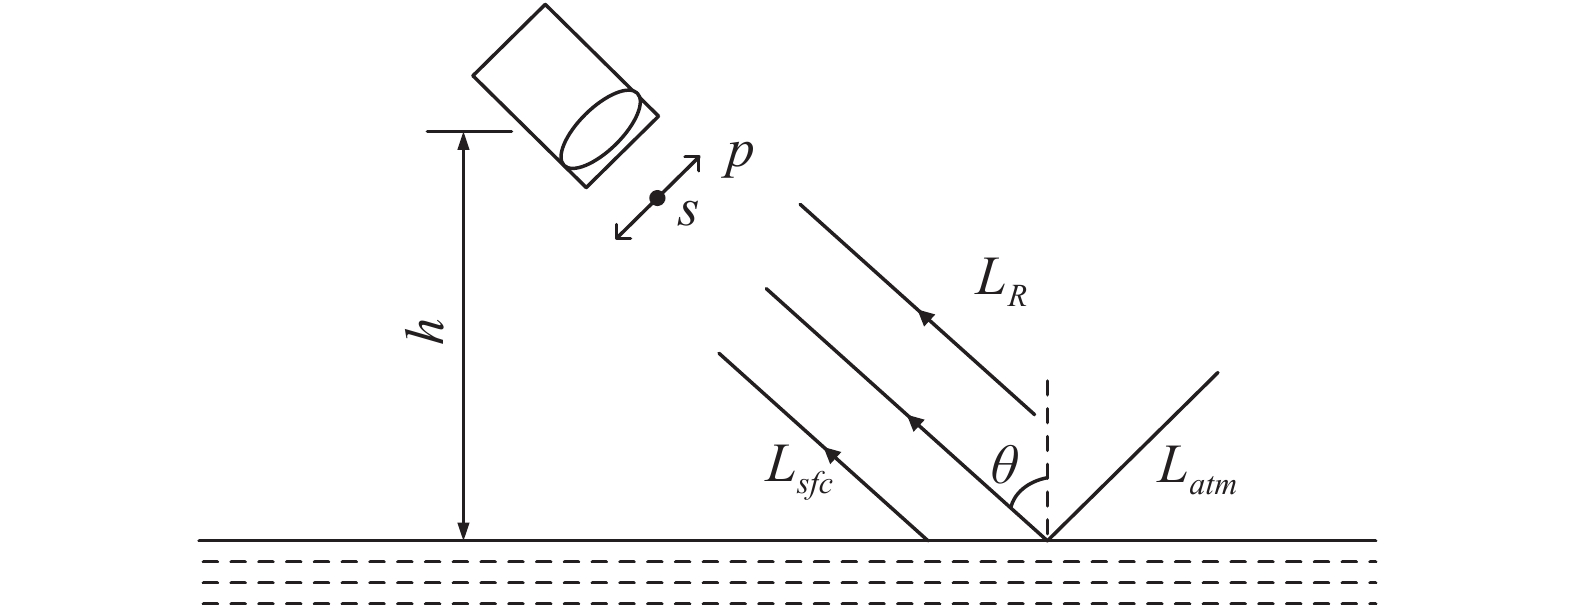 Photoelectric polarization detection model for water surface